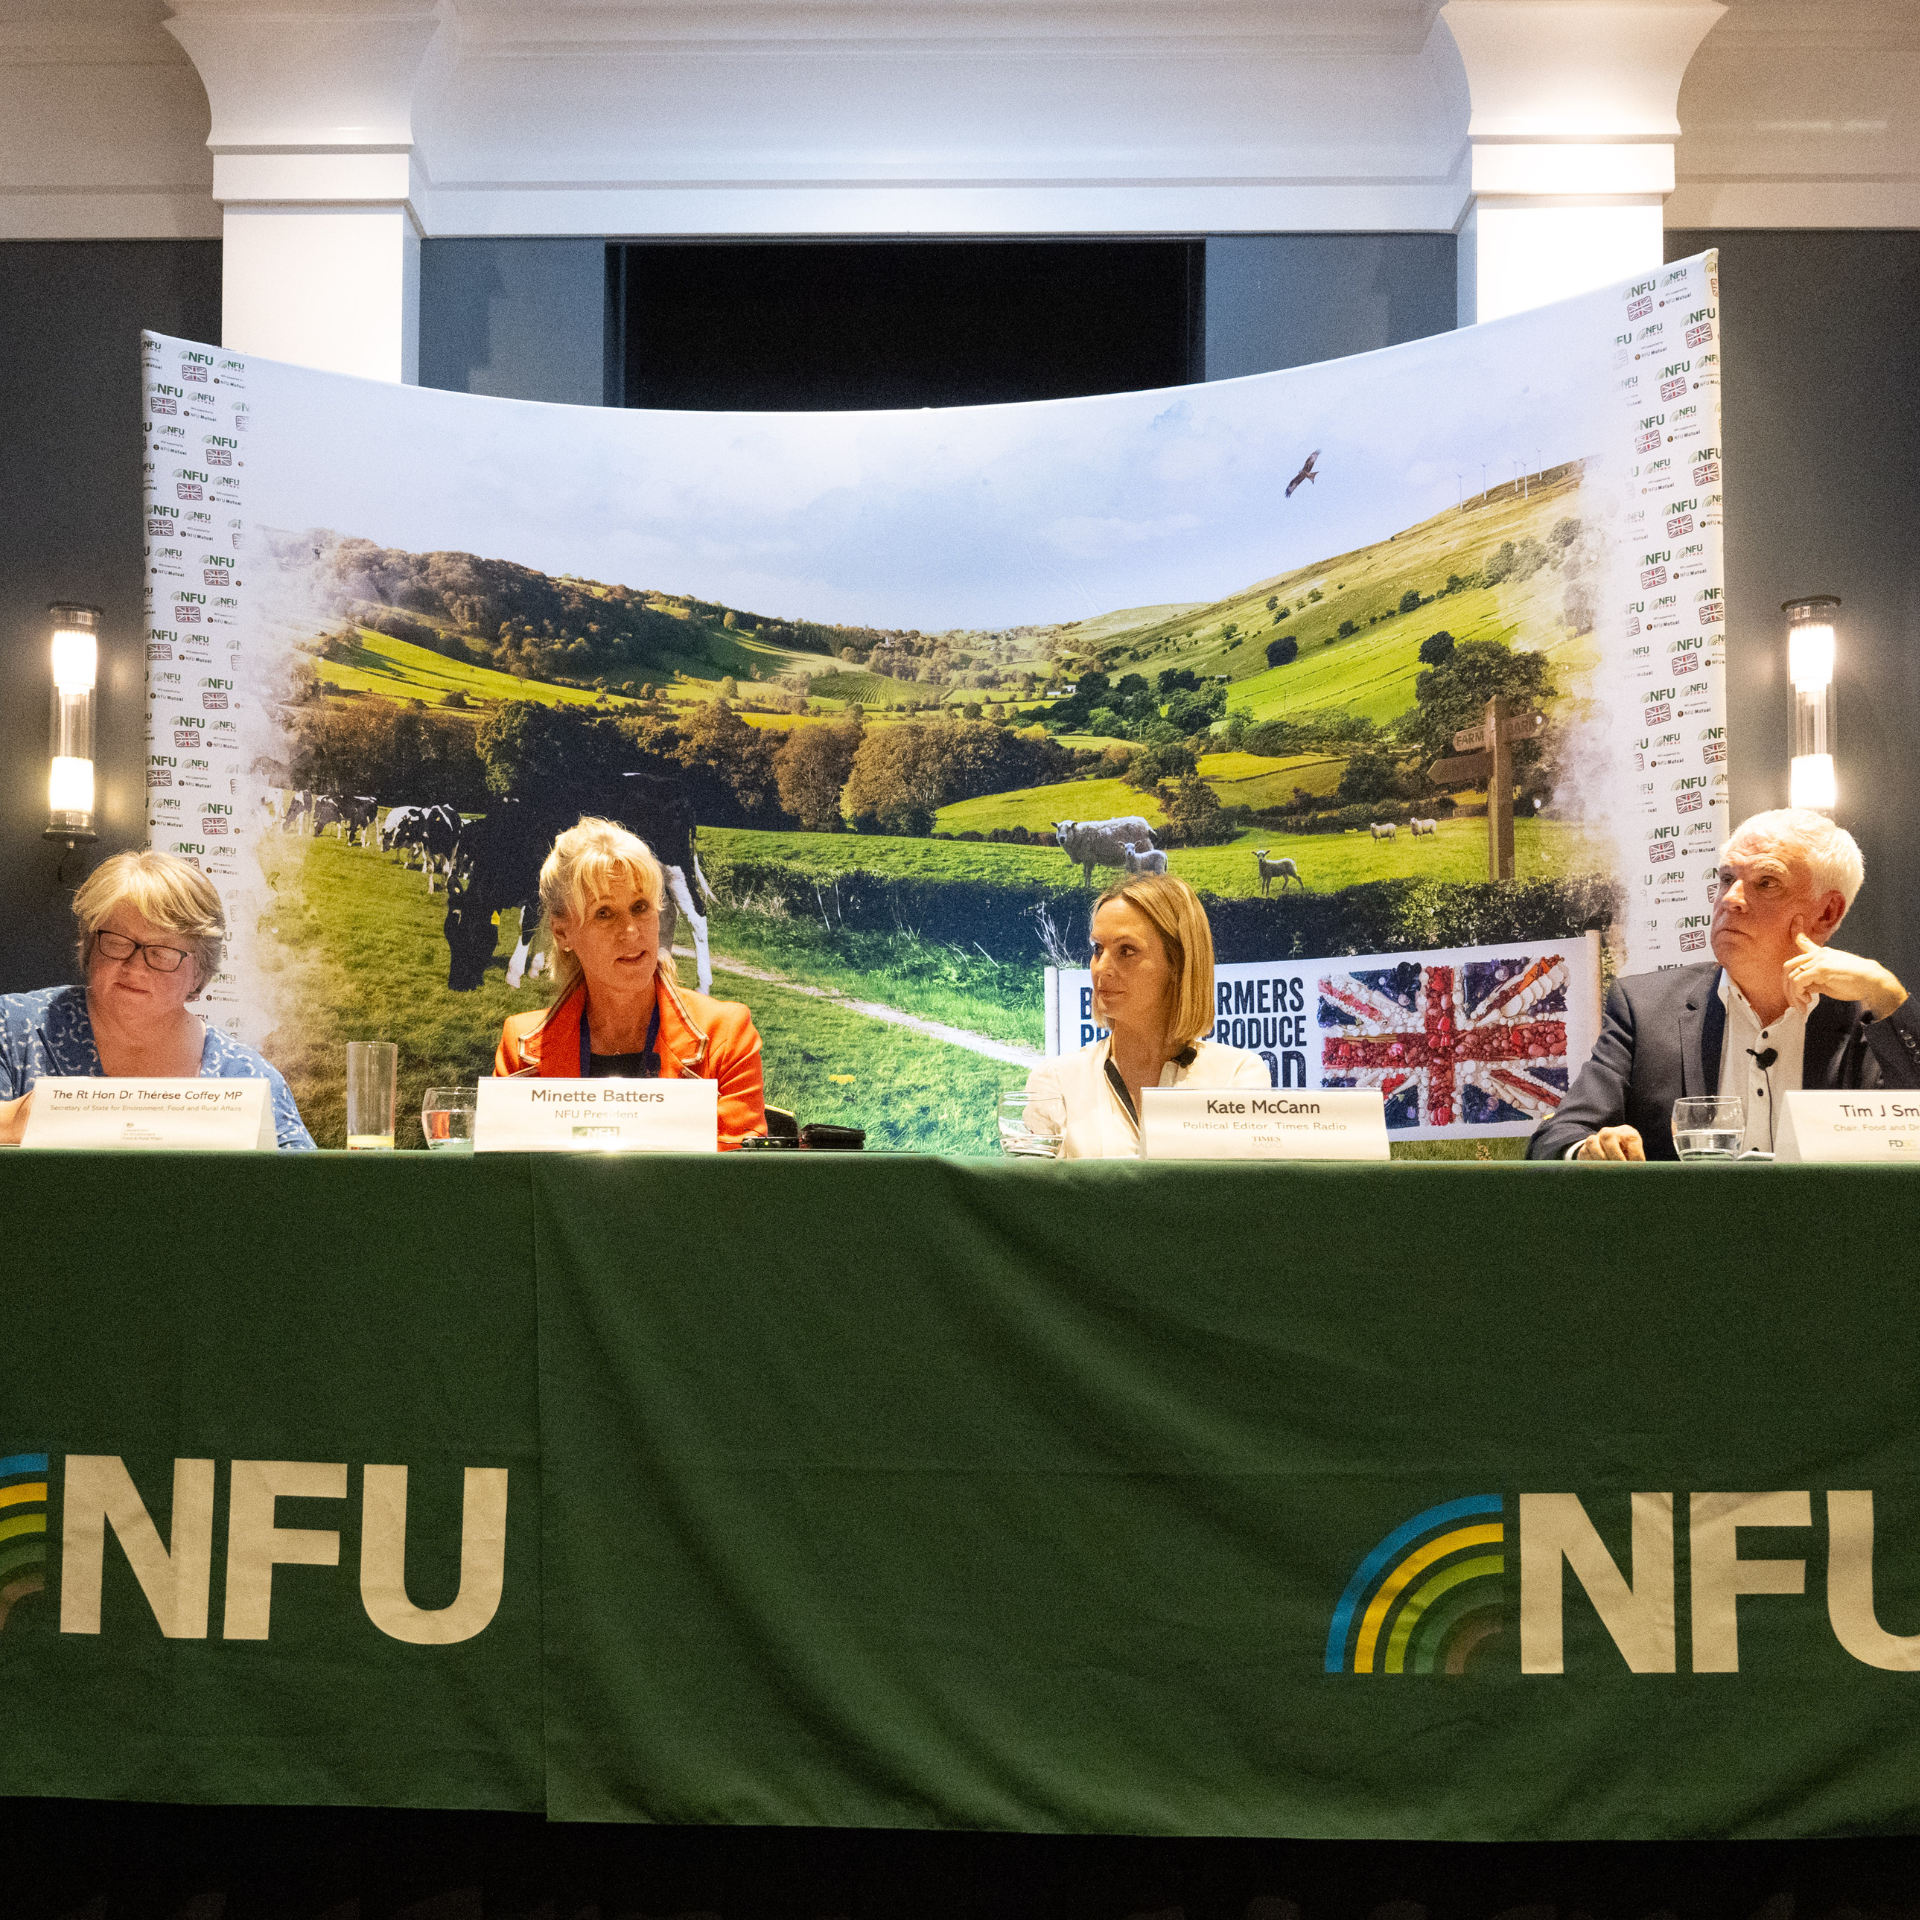 Panelists at NFU's Conservative fringe event. (L-R) Therese Coffey MP, Minette Batters, Kate McCann, Tim Smith.